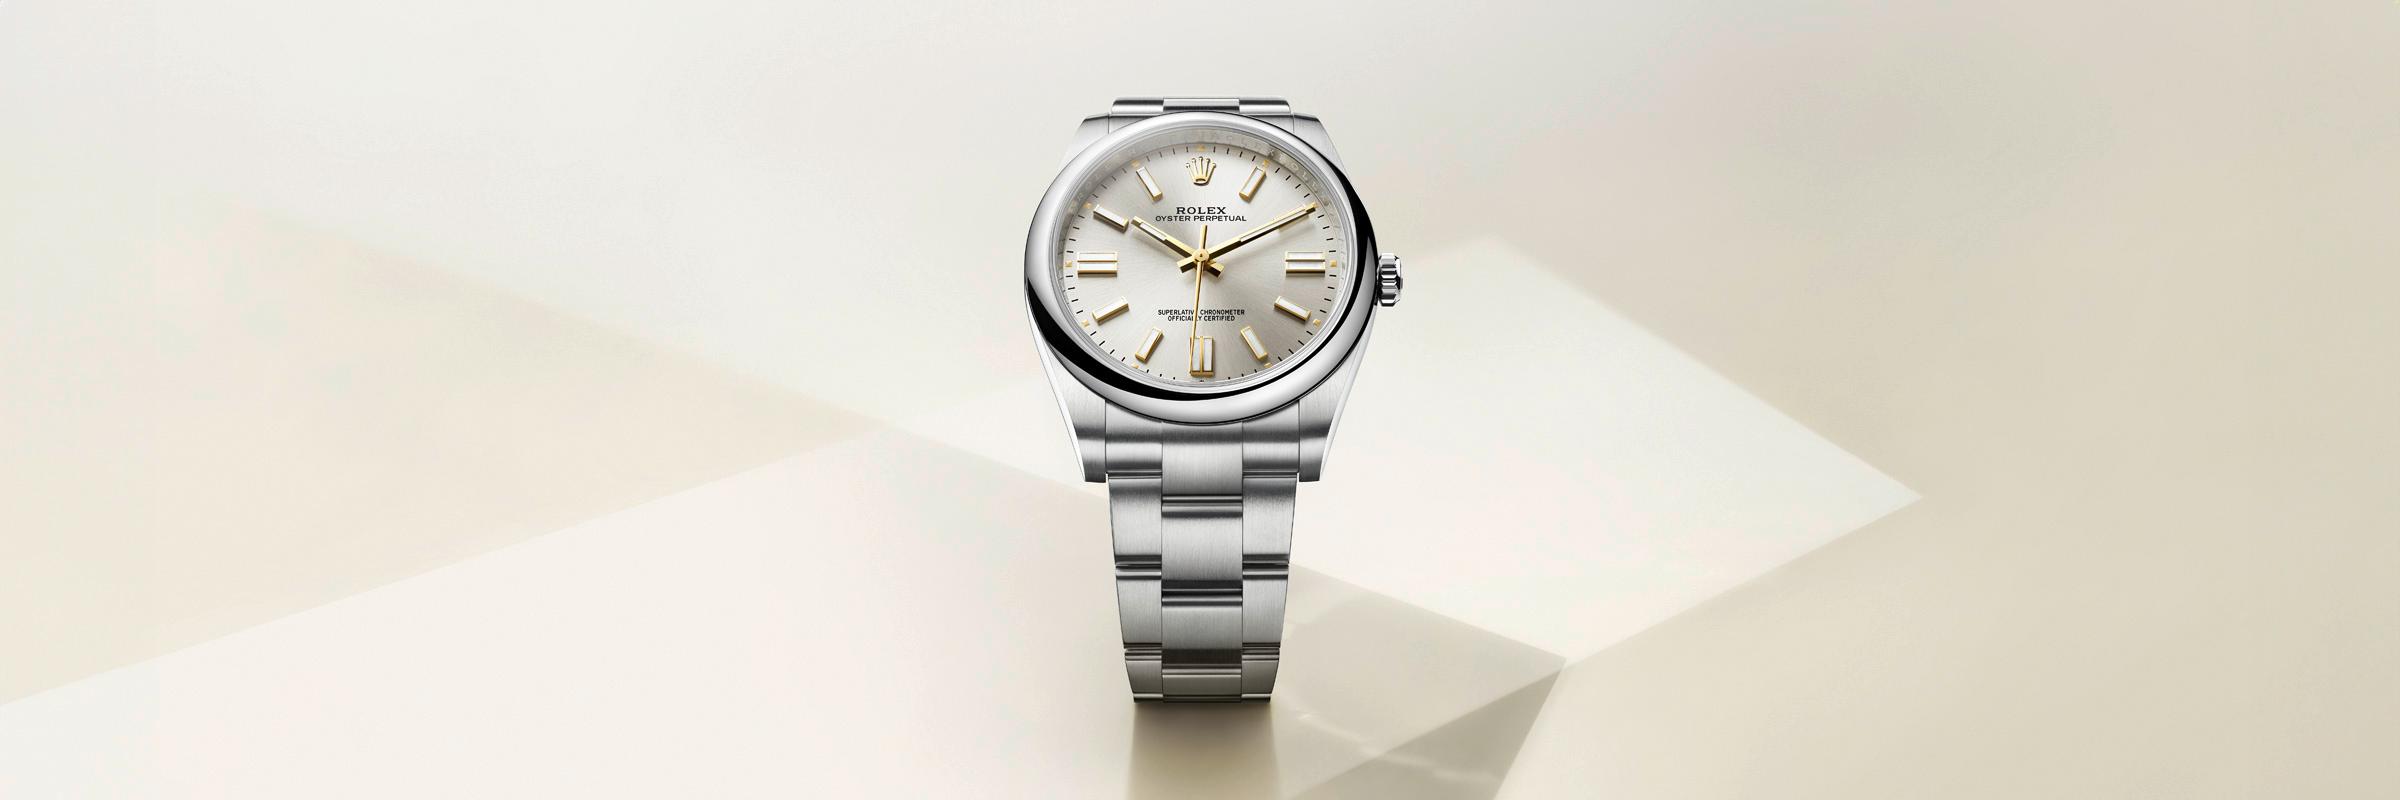 rolex-collection_banner-oyster-perpetual-m124300-0001_2210jva_001